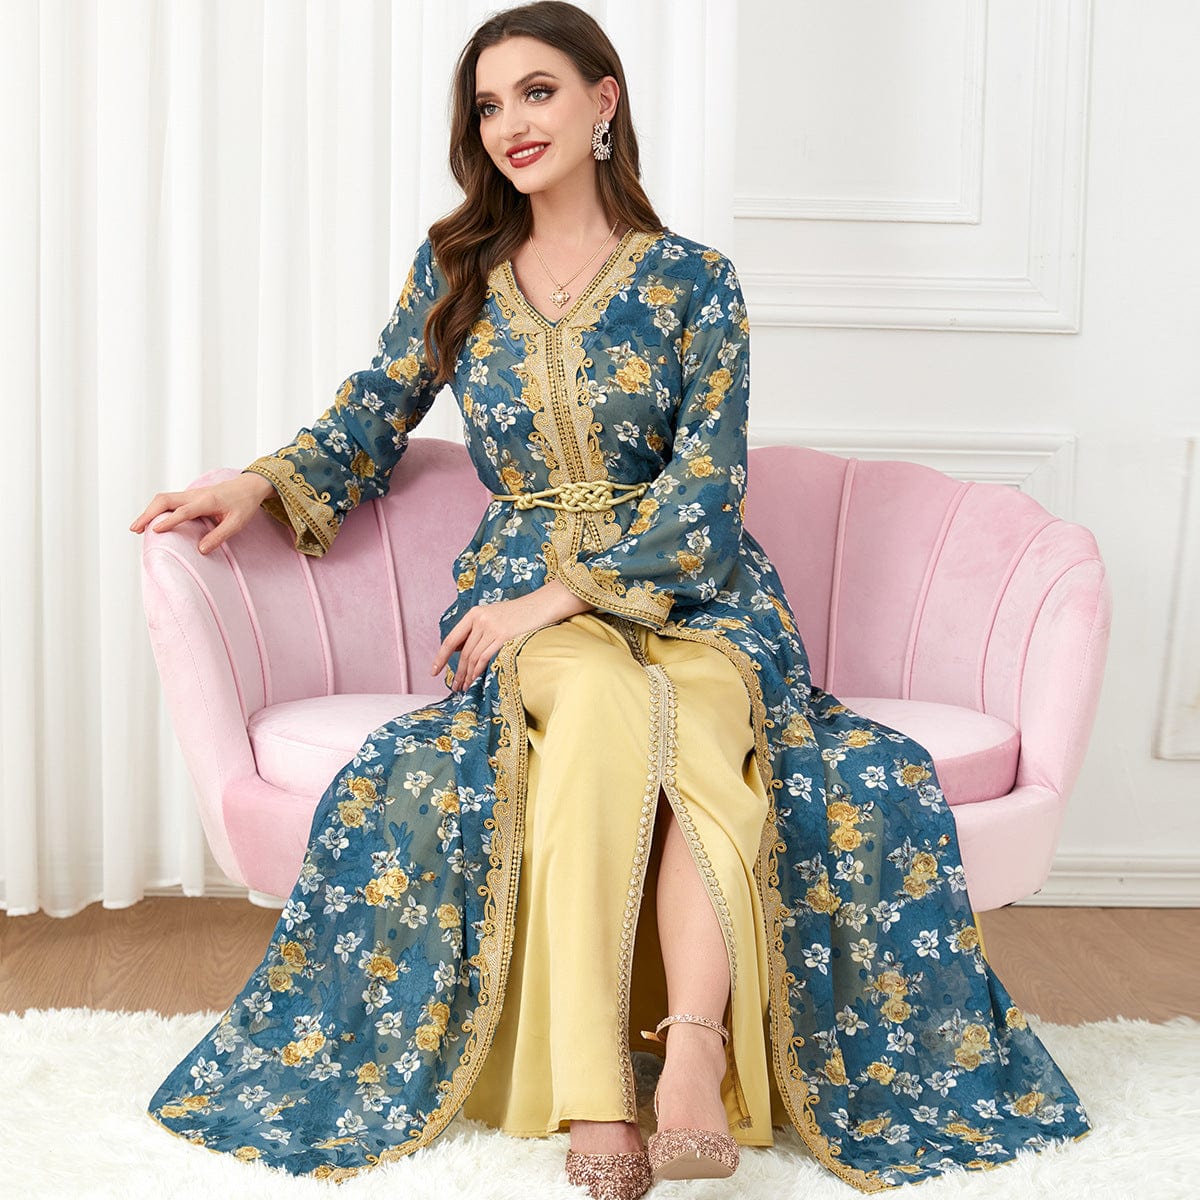 a woman wearing a floral green / 2XL women's arabic clothing fashion robe sitting on pink couch